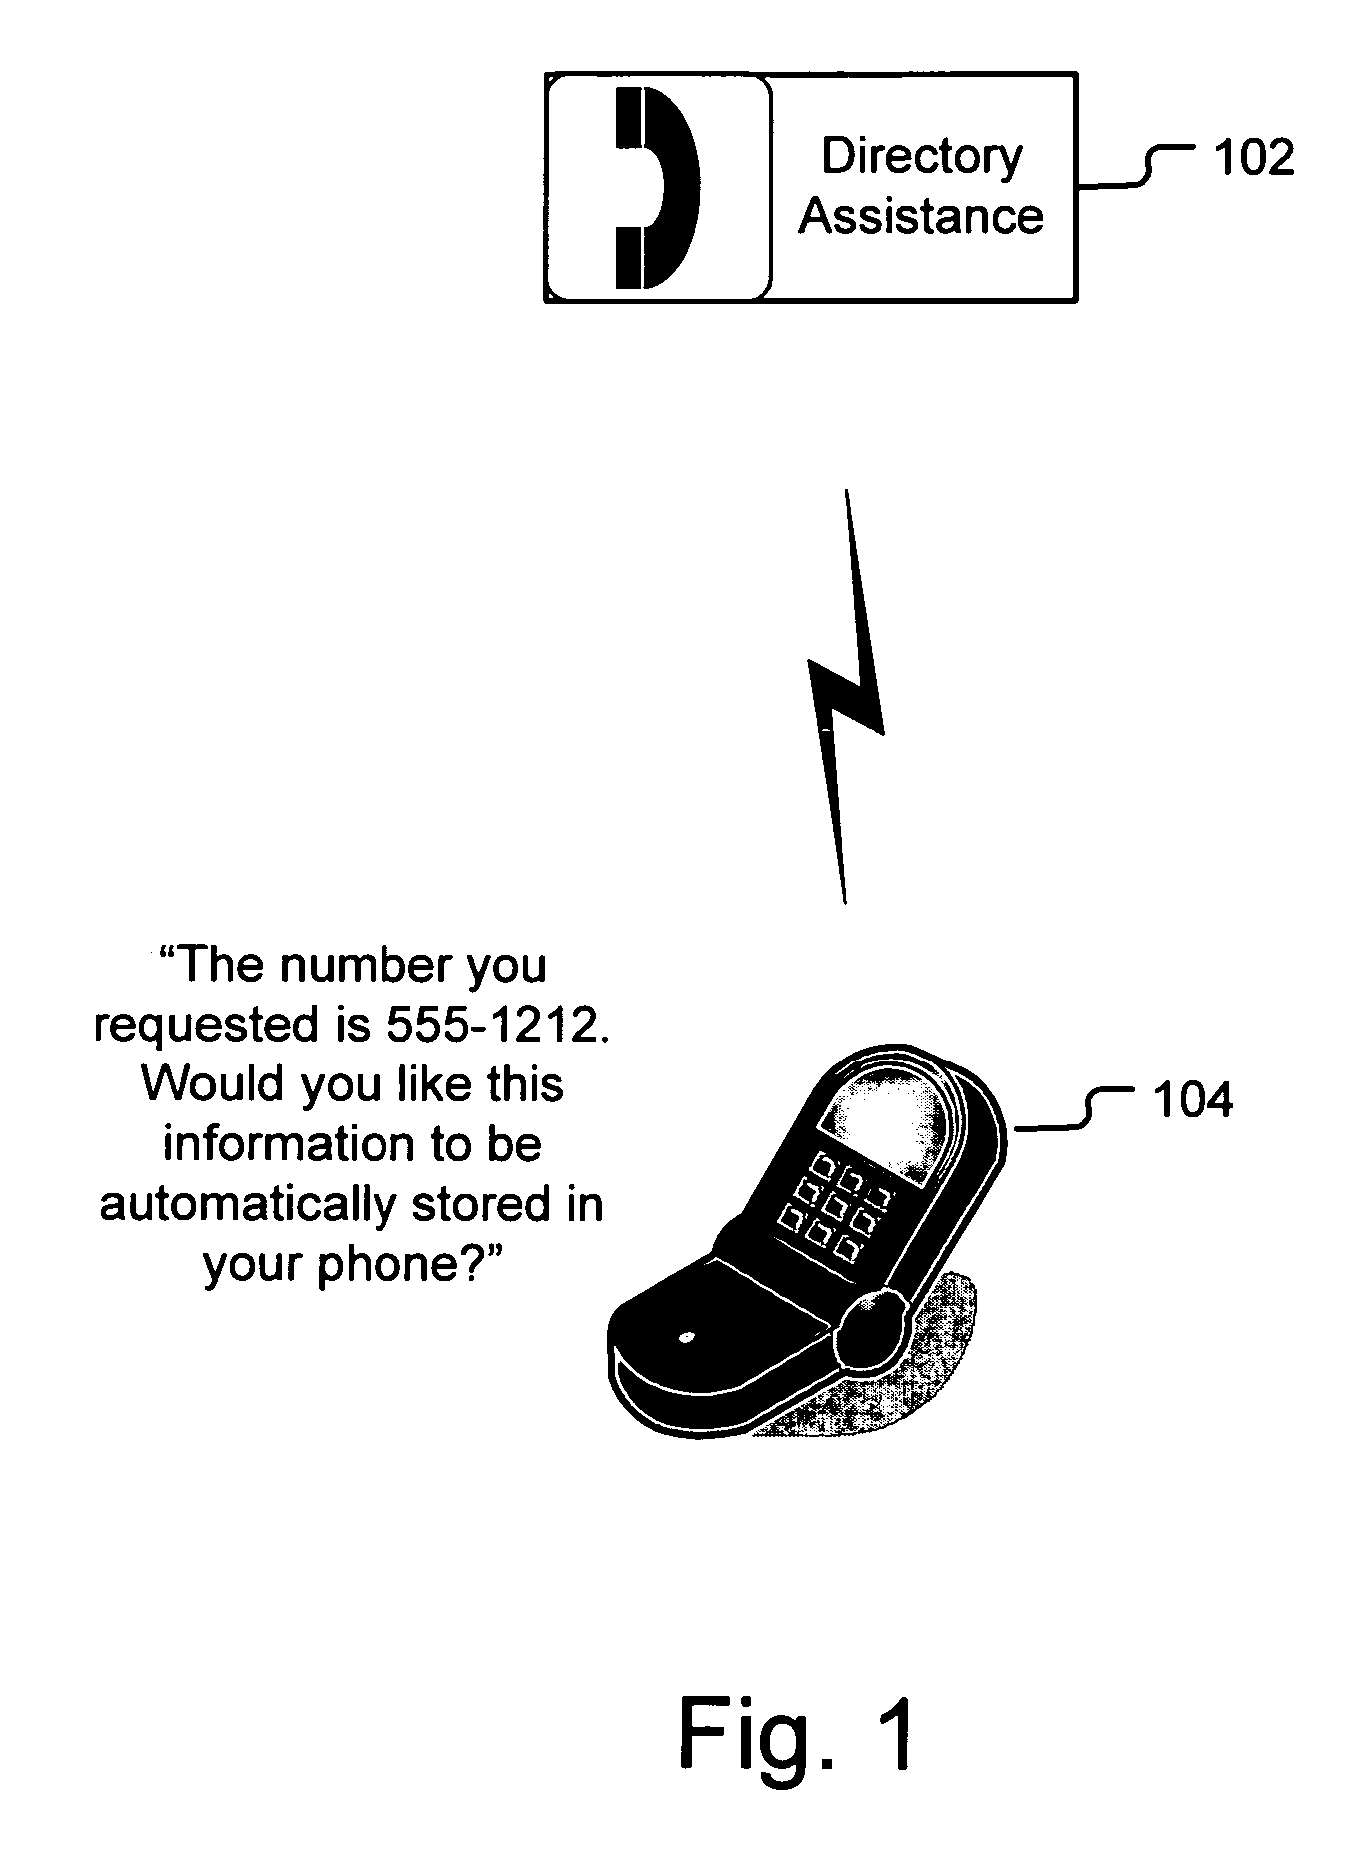 Automatic storage of contact information on a cellular phone